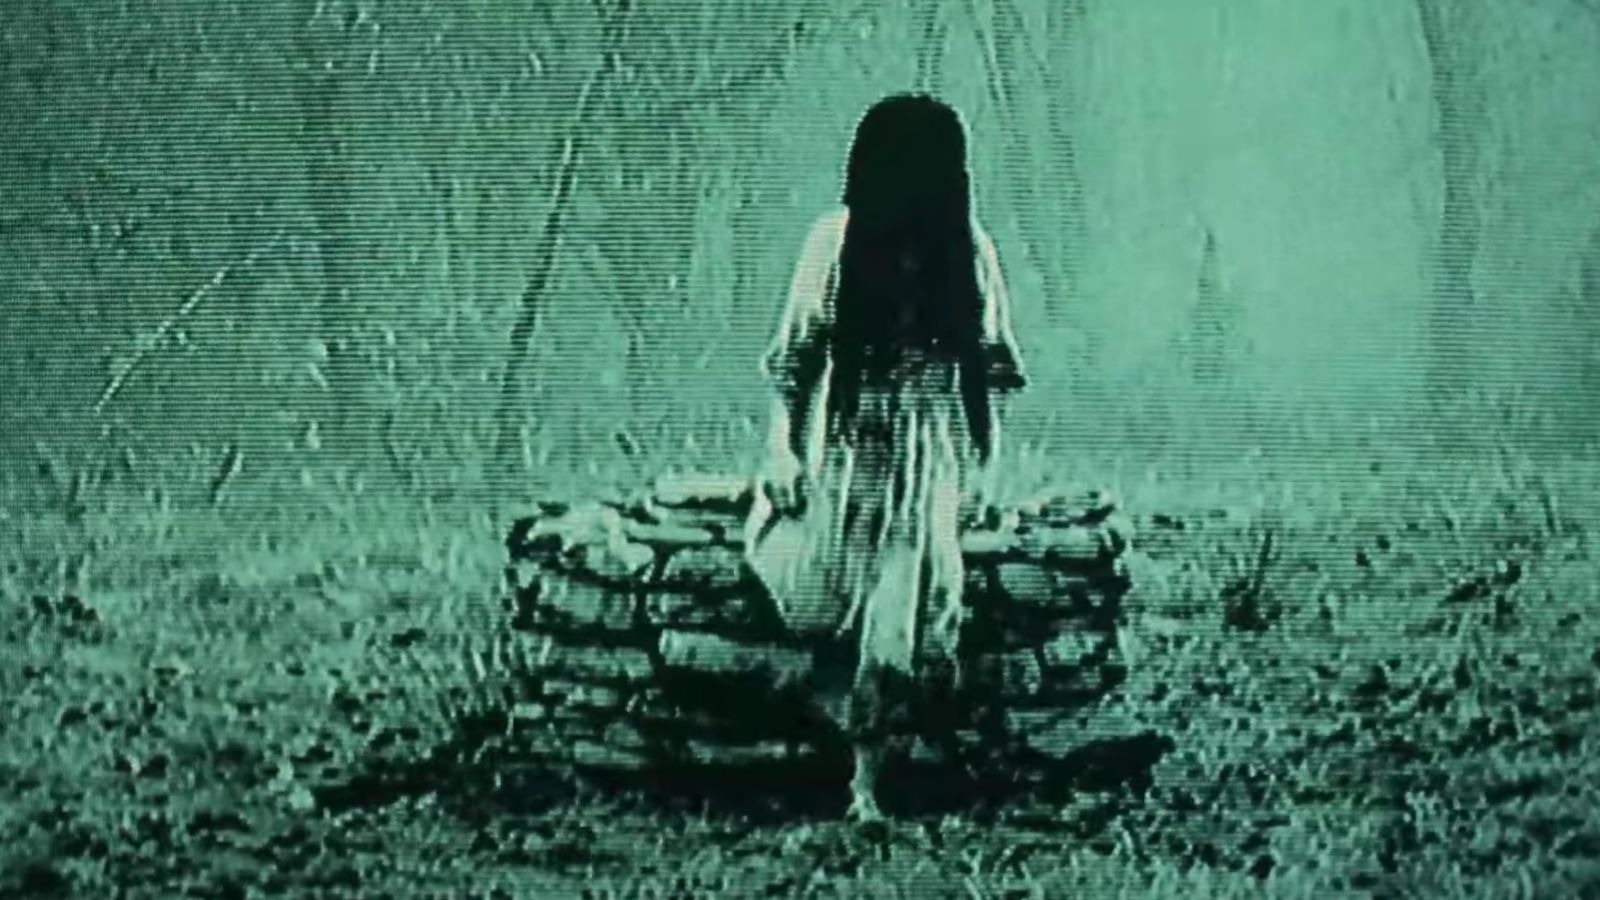 The Himeji Castle Horror Story That Inspired The Ring And Ringu